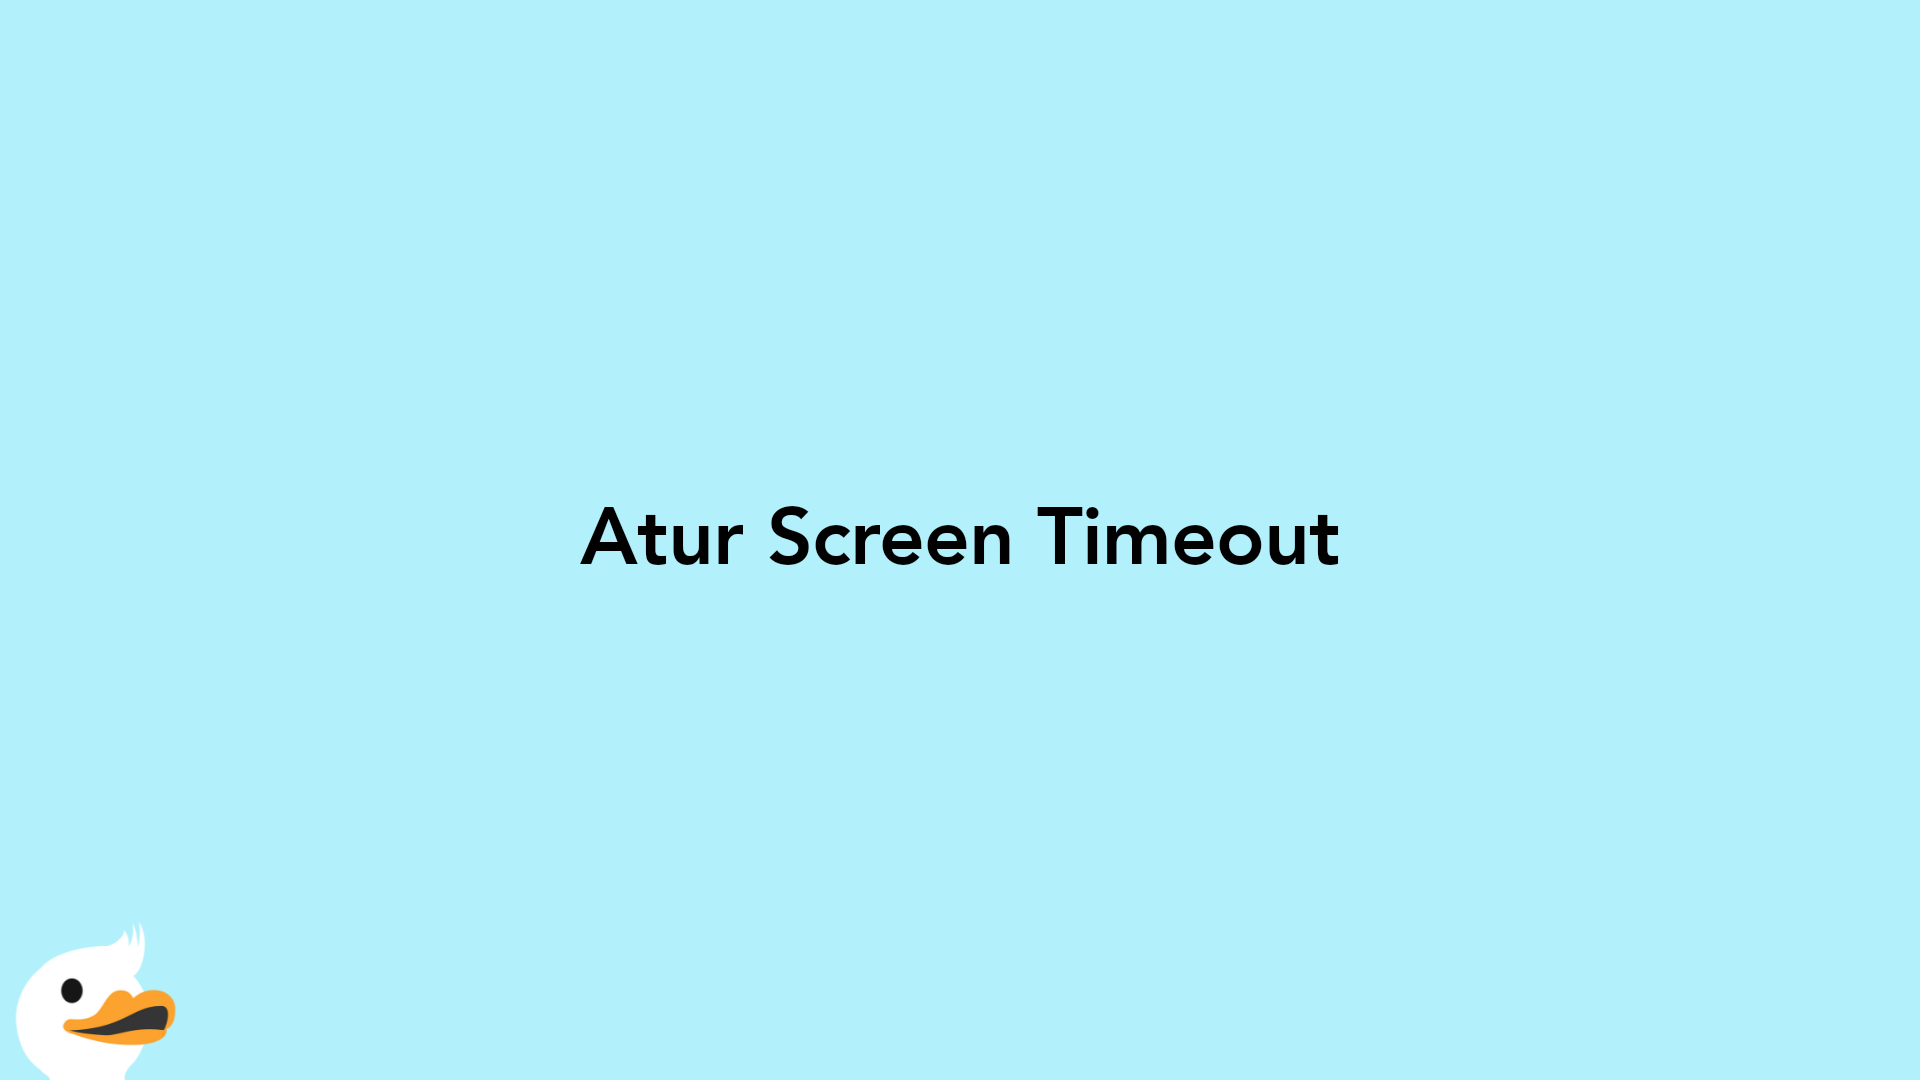 Atur Screen Timeout